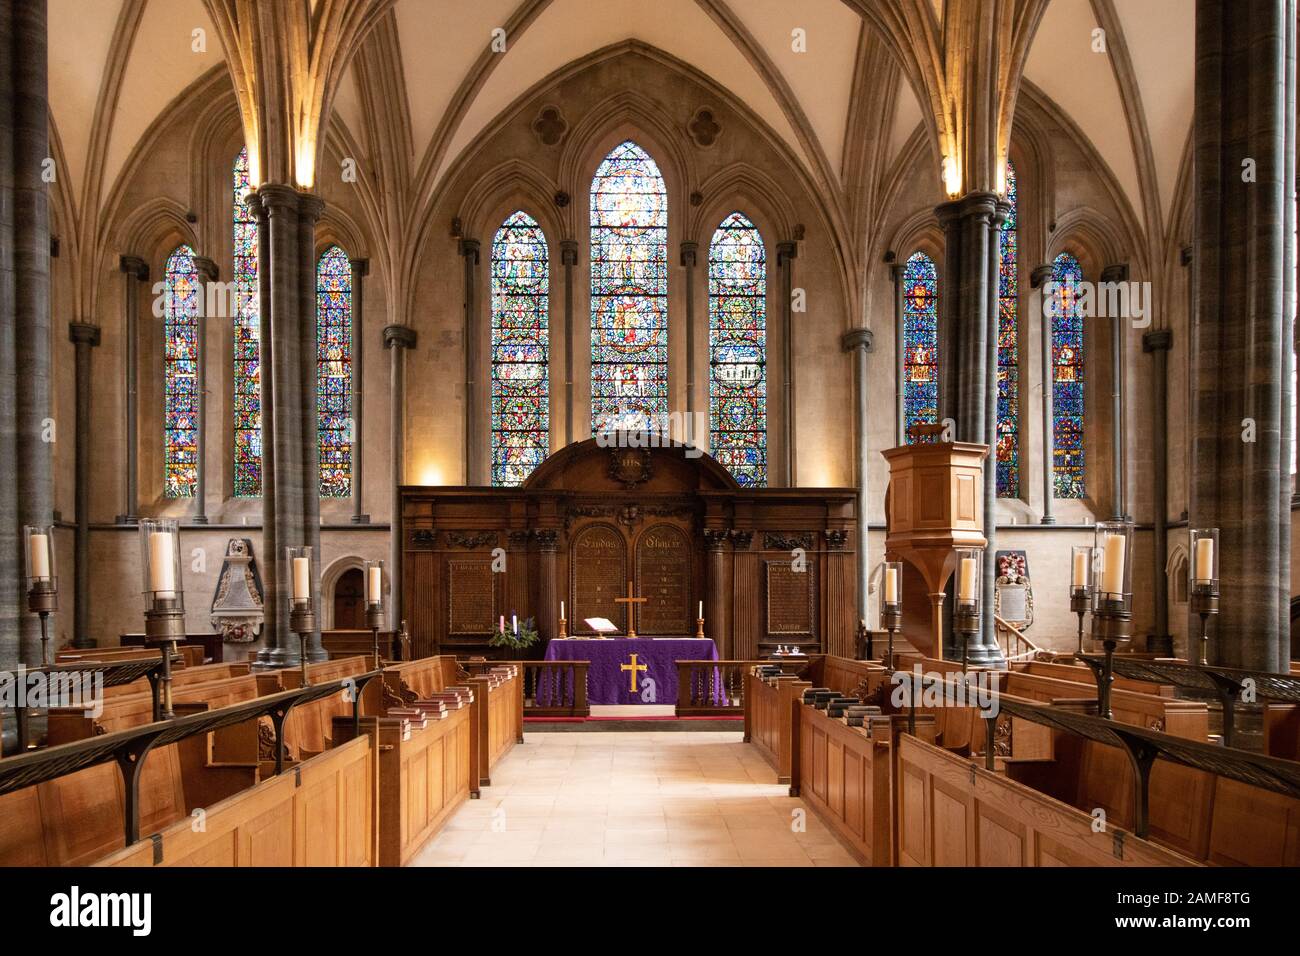 The Temple Church, Temple, Central London, Mother Church of the Common Law. Known for it's links with the Templars and Magna Carta. Stock Photo